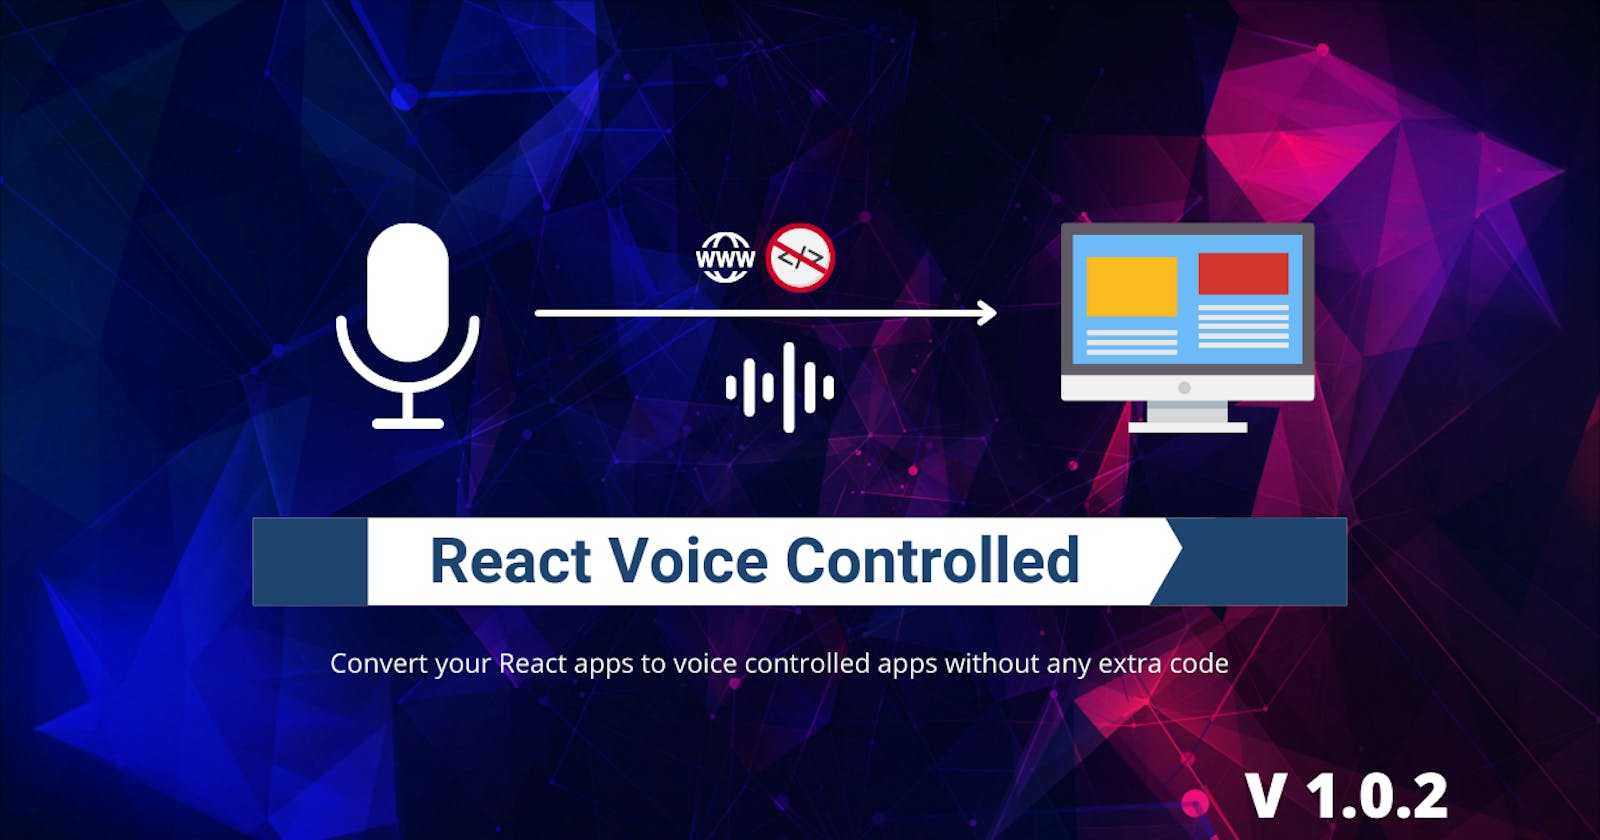 Introducing react-voice-controlled:- A React library that enables voice controls for your React apps without the need of extra code